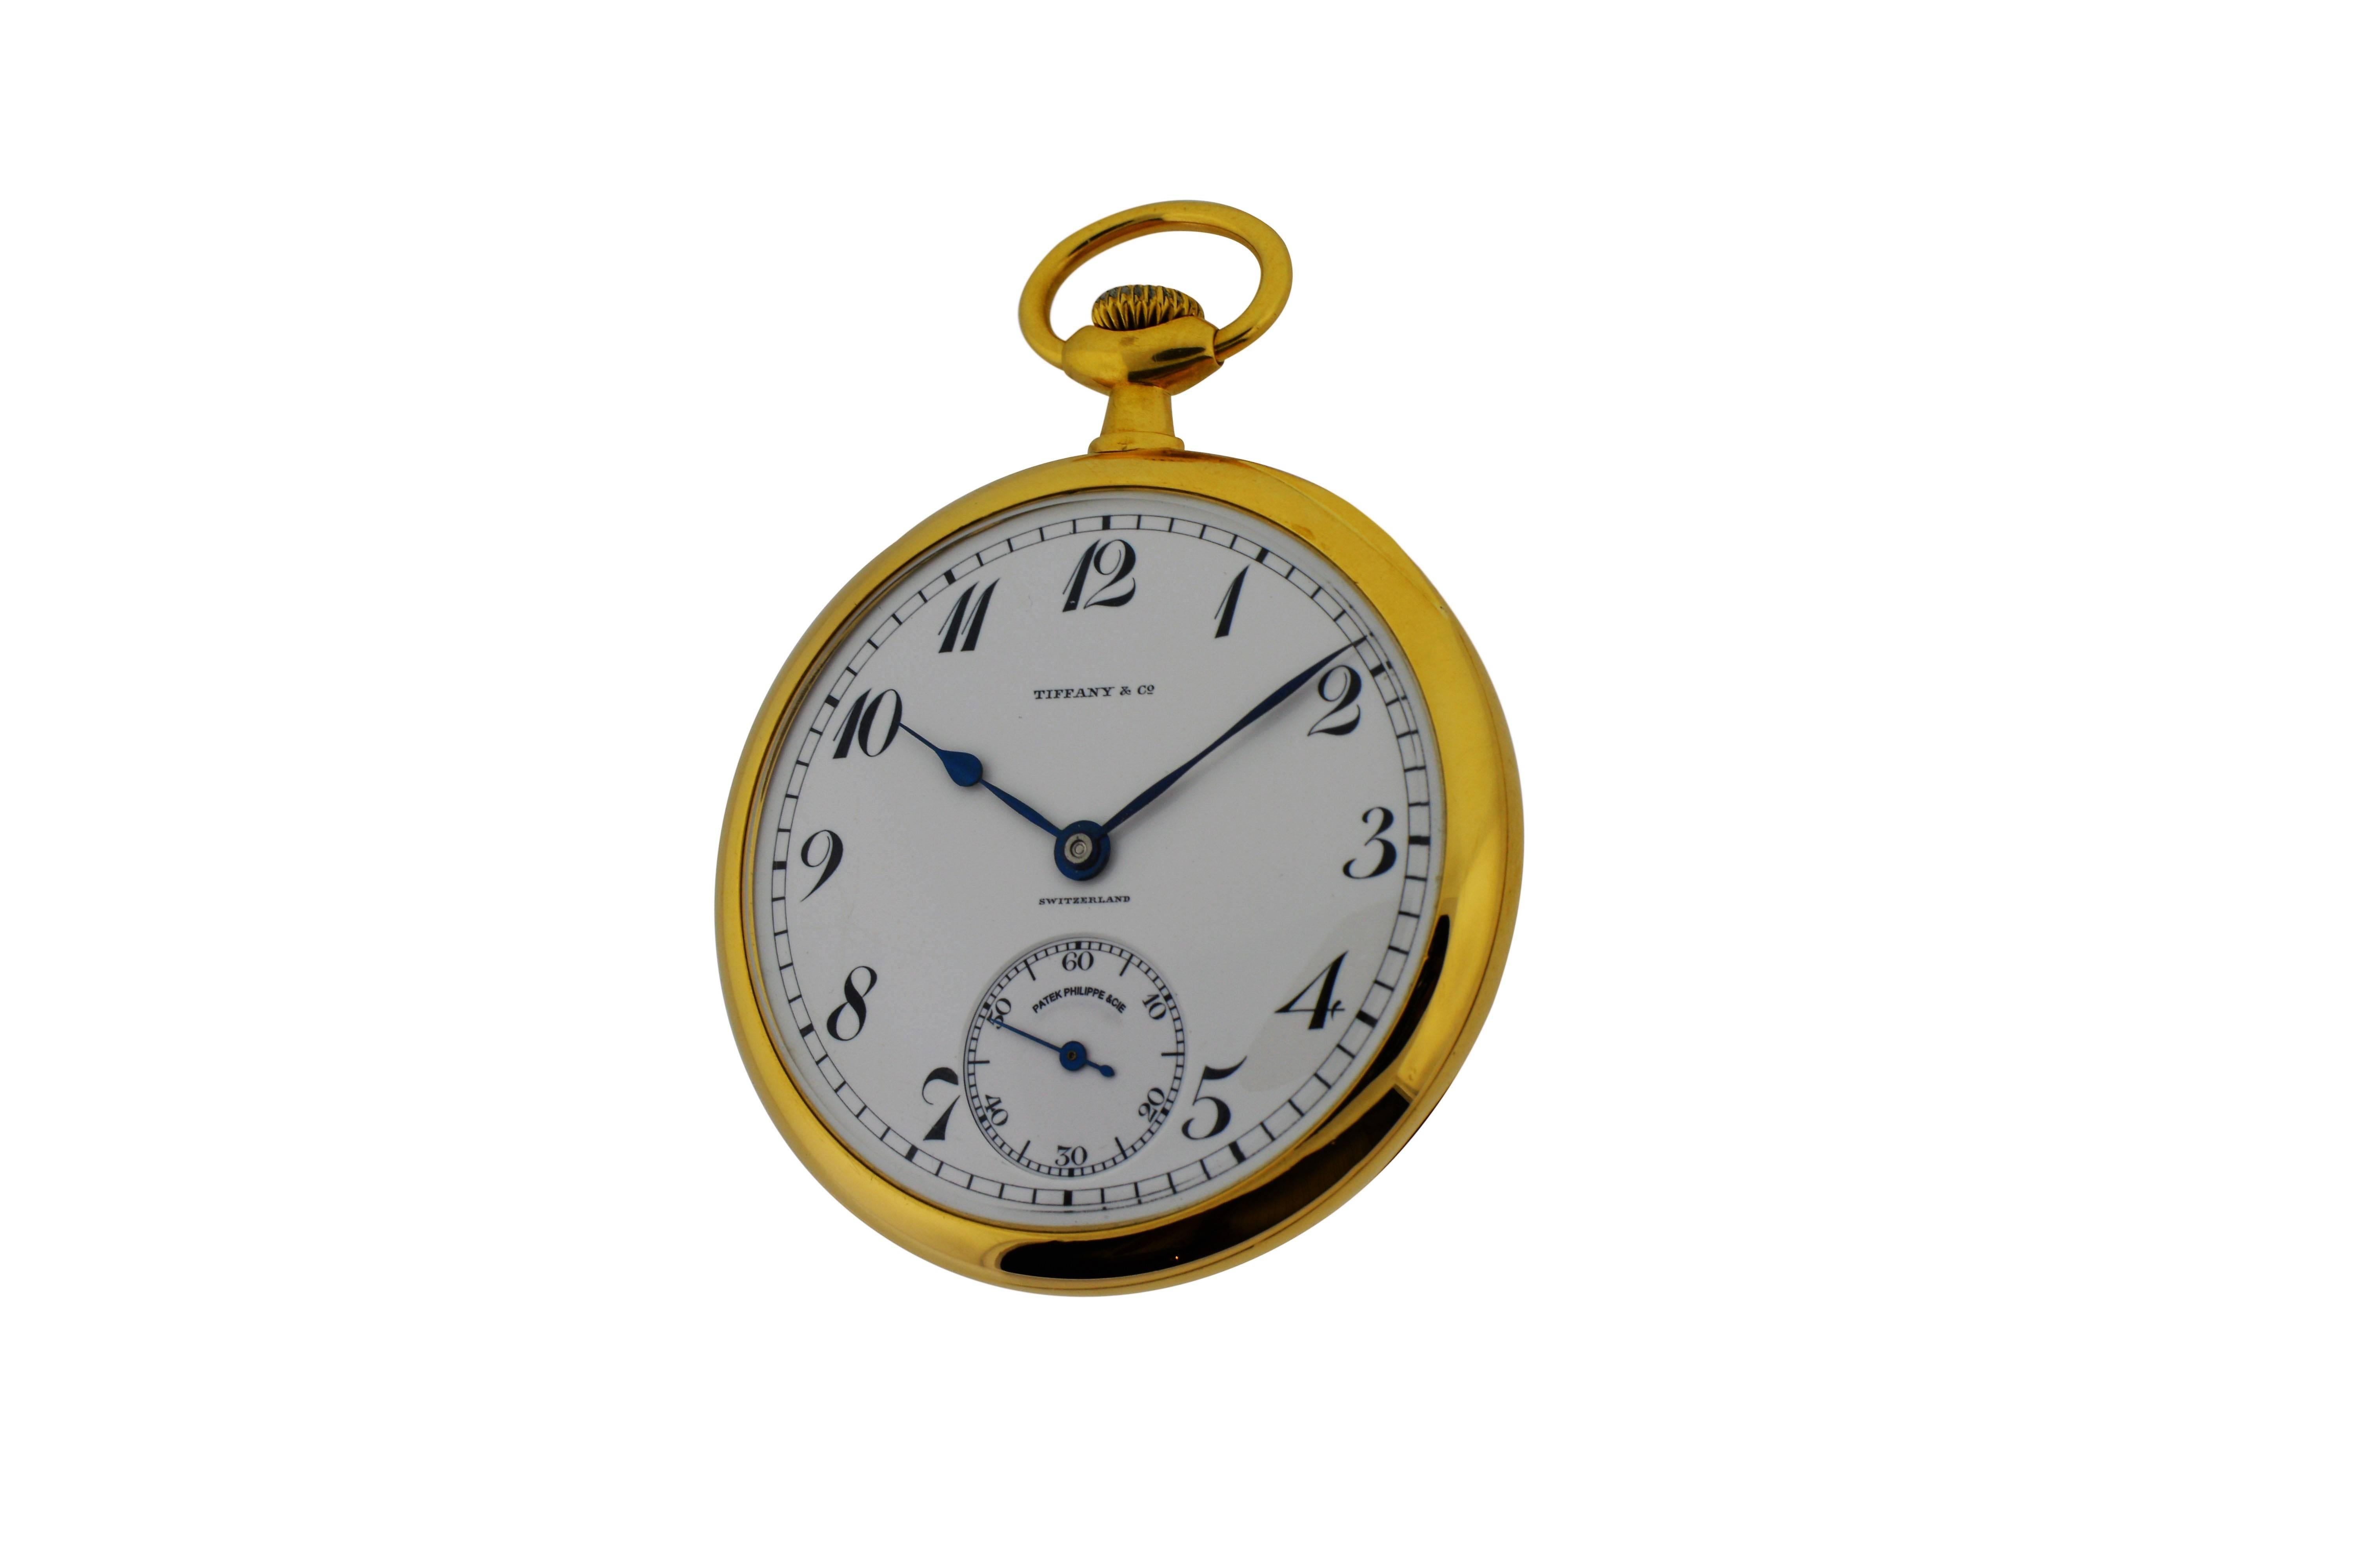 FACTORY / HOUSE: Patek Philippe for Tiffany & Co.
STYLE / REFERENCE: Open Faced Pocket Watch
METAL / MATERIAL: 18Kt. Yellow Gold
CIRCA: 1918
DIMENSIONS:  47mm Diameter
MOVEMENT / CALIBER: 18 Jewels Manual Winding
DIAL / HANDS: Original